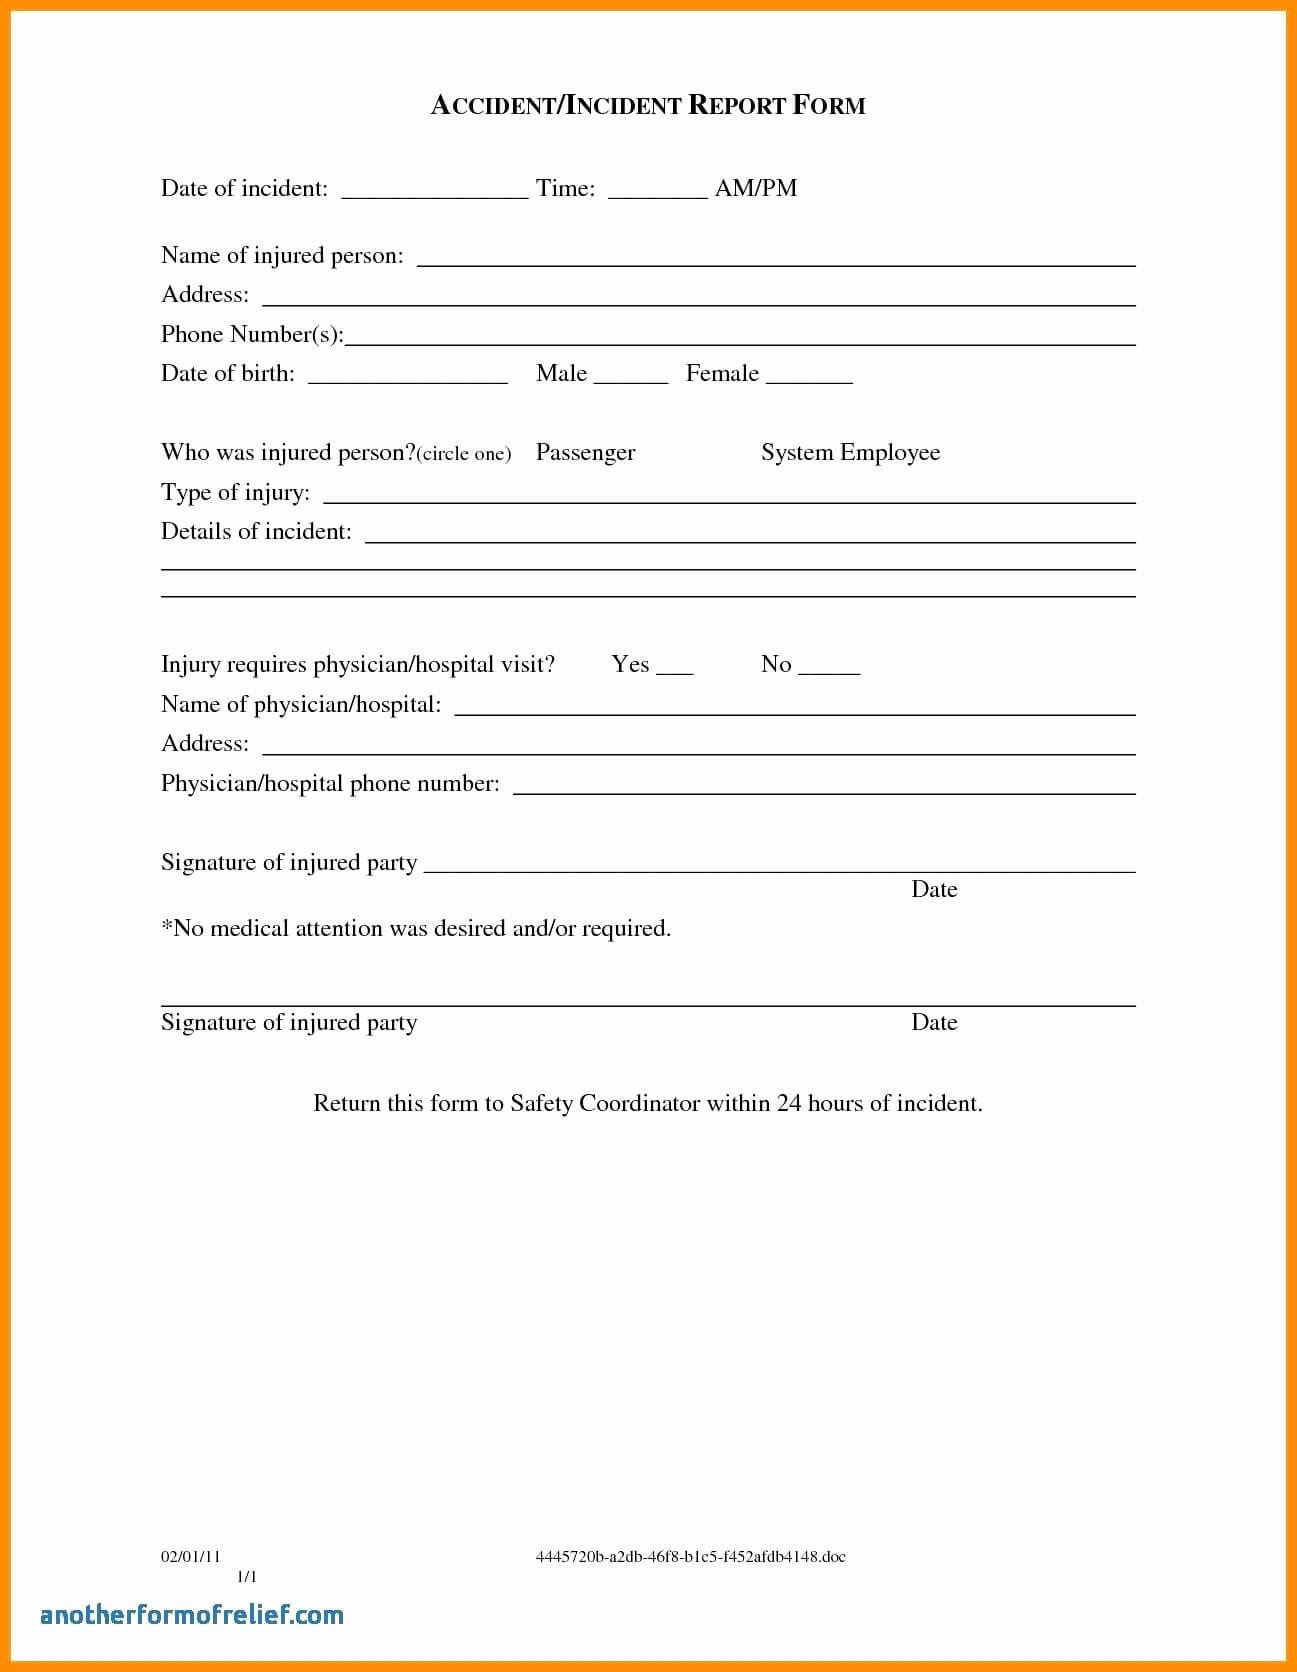 003 Template Ideas Incident Reportm Accidentms Hazard With Regard To Hazard Incident Report Form Template